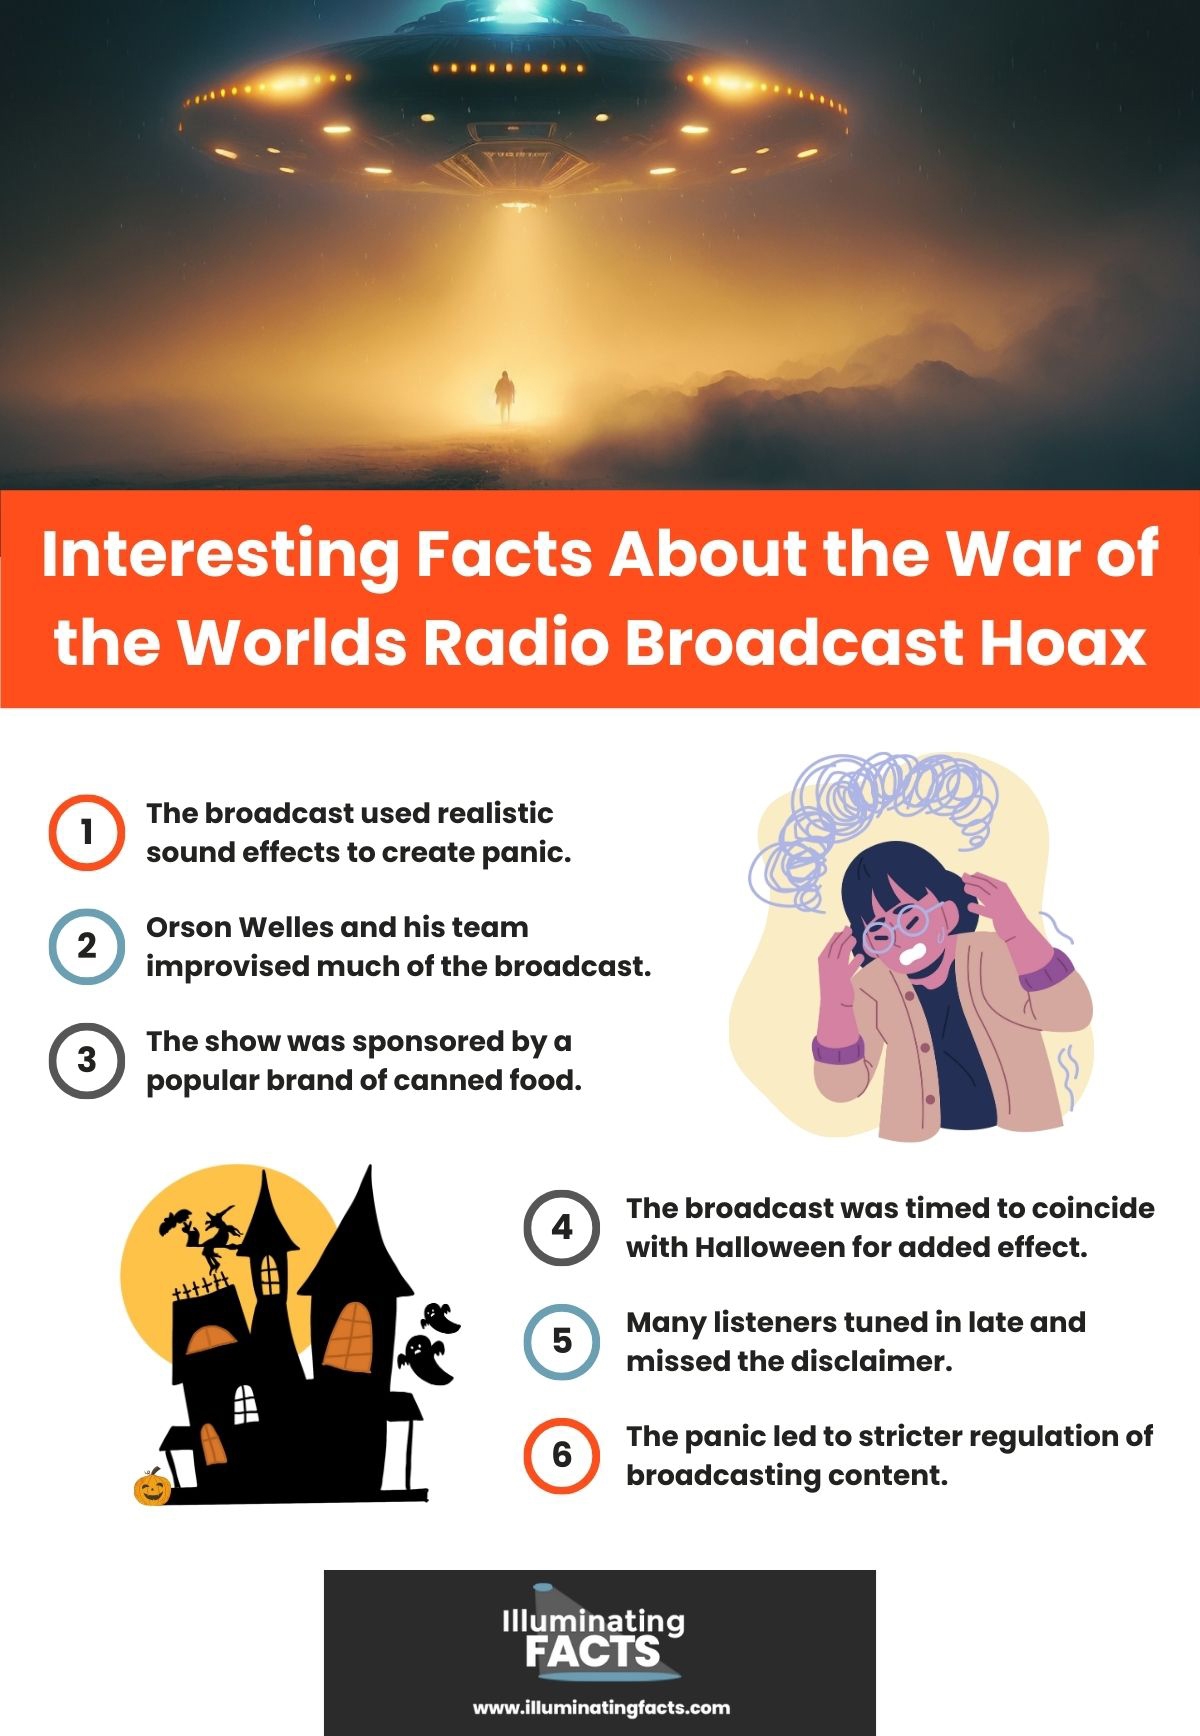 Interesting Facts About the War of the Worlds Radio Broadcast Hoax